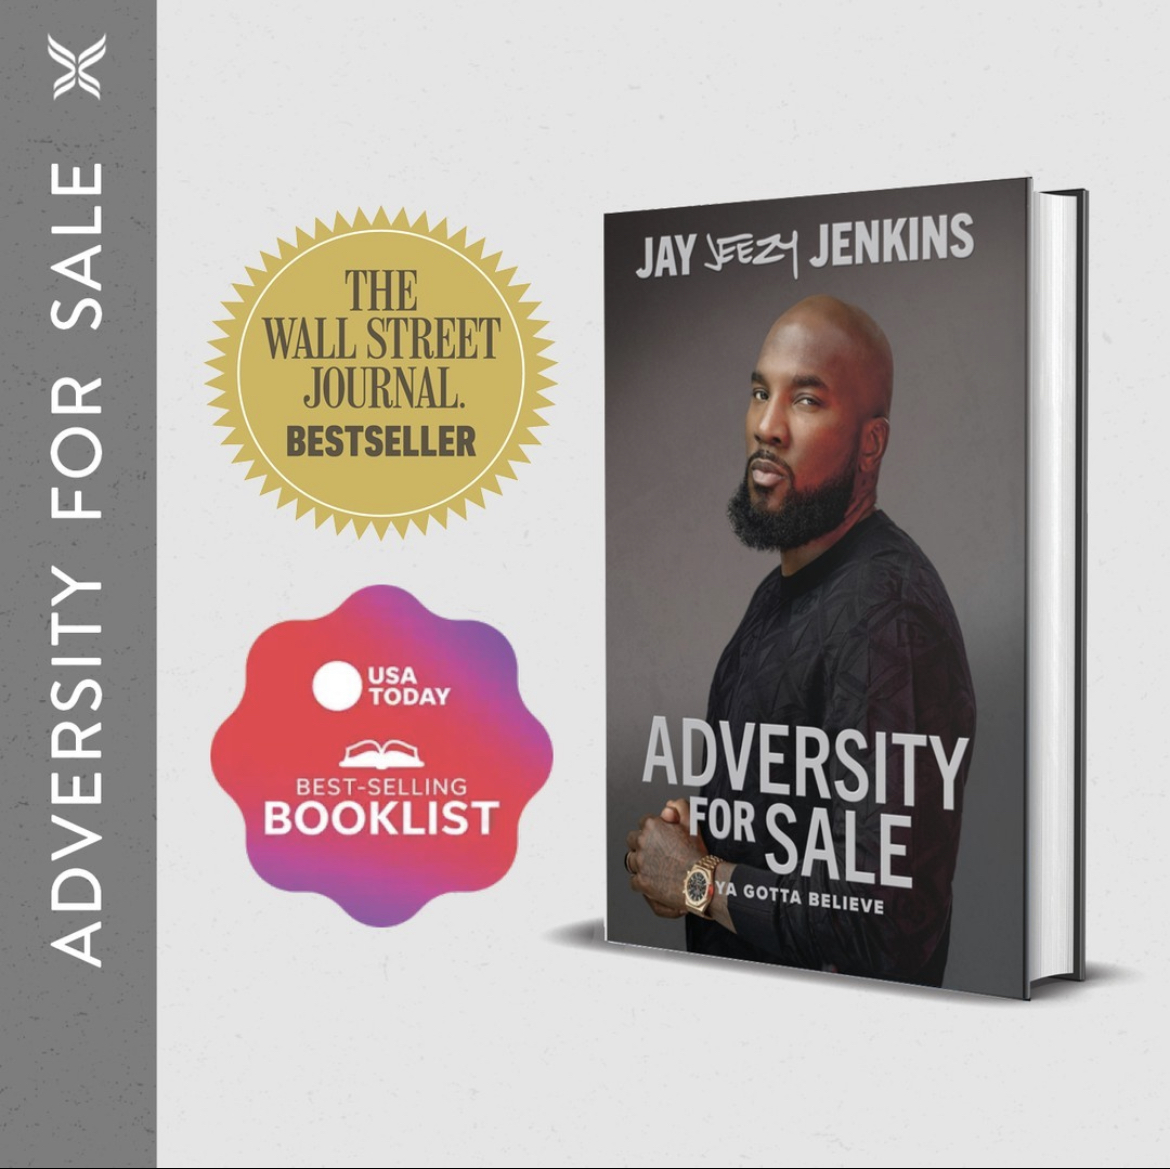 A big congratulations to author Jay @jeezy Jenkins on 'Adversity for Sale' making the Wall Street Journal's #10 in Hardcover Nonfiction and #2 in Hardcover Business, plus USA Today's #15 bestselling book. Click here to get your copy today: bit.ly/3EbKIS9